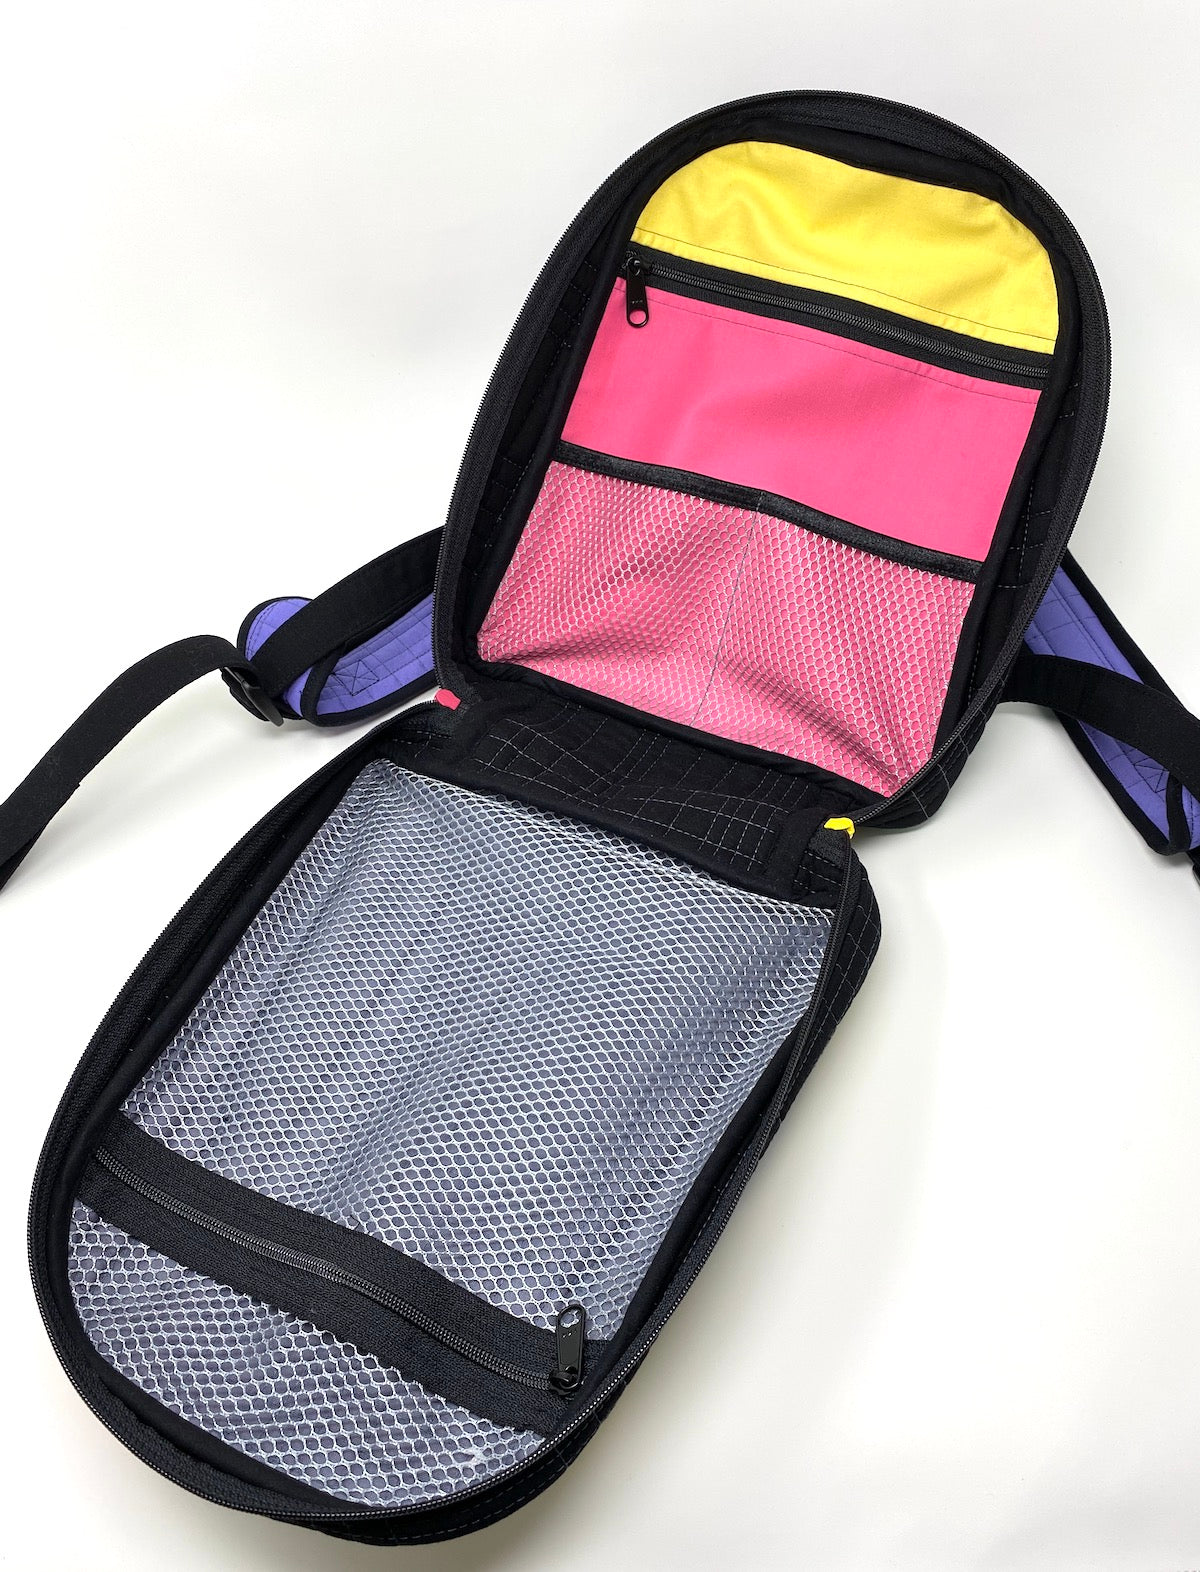 ByAnnie Out and About colorblock backpack at Sewfinity.com